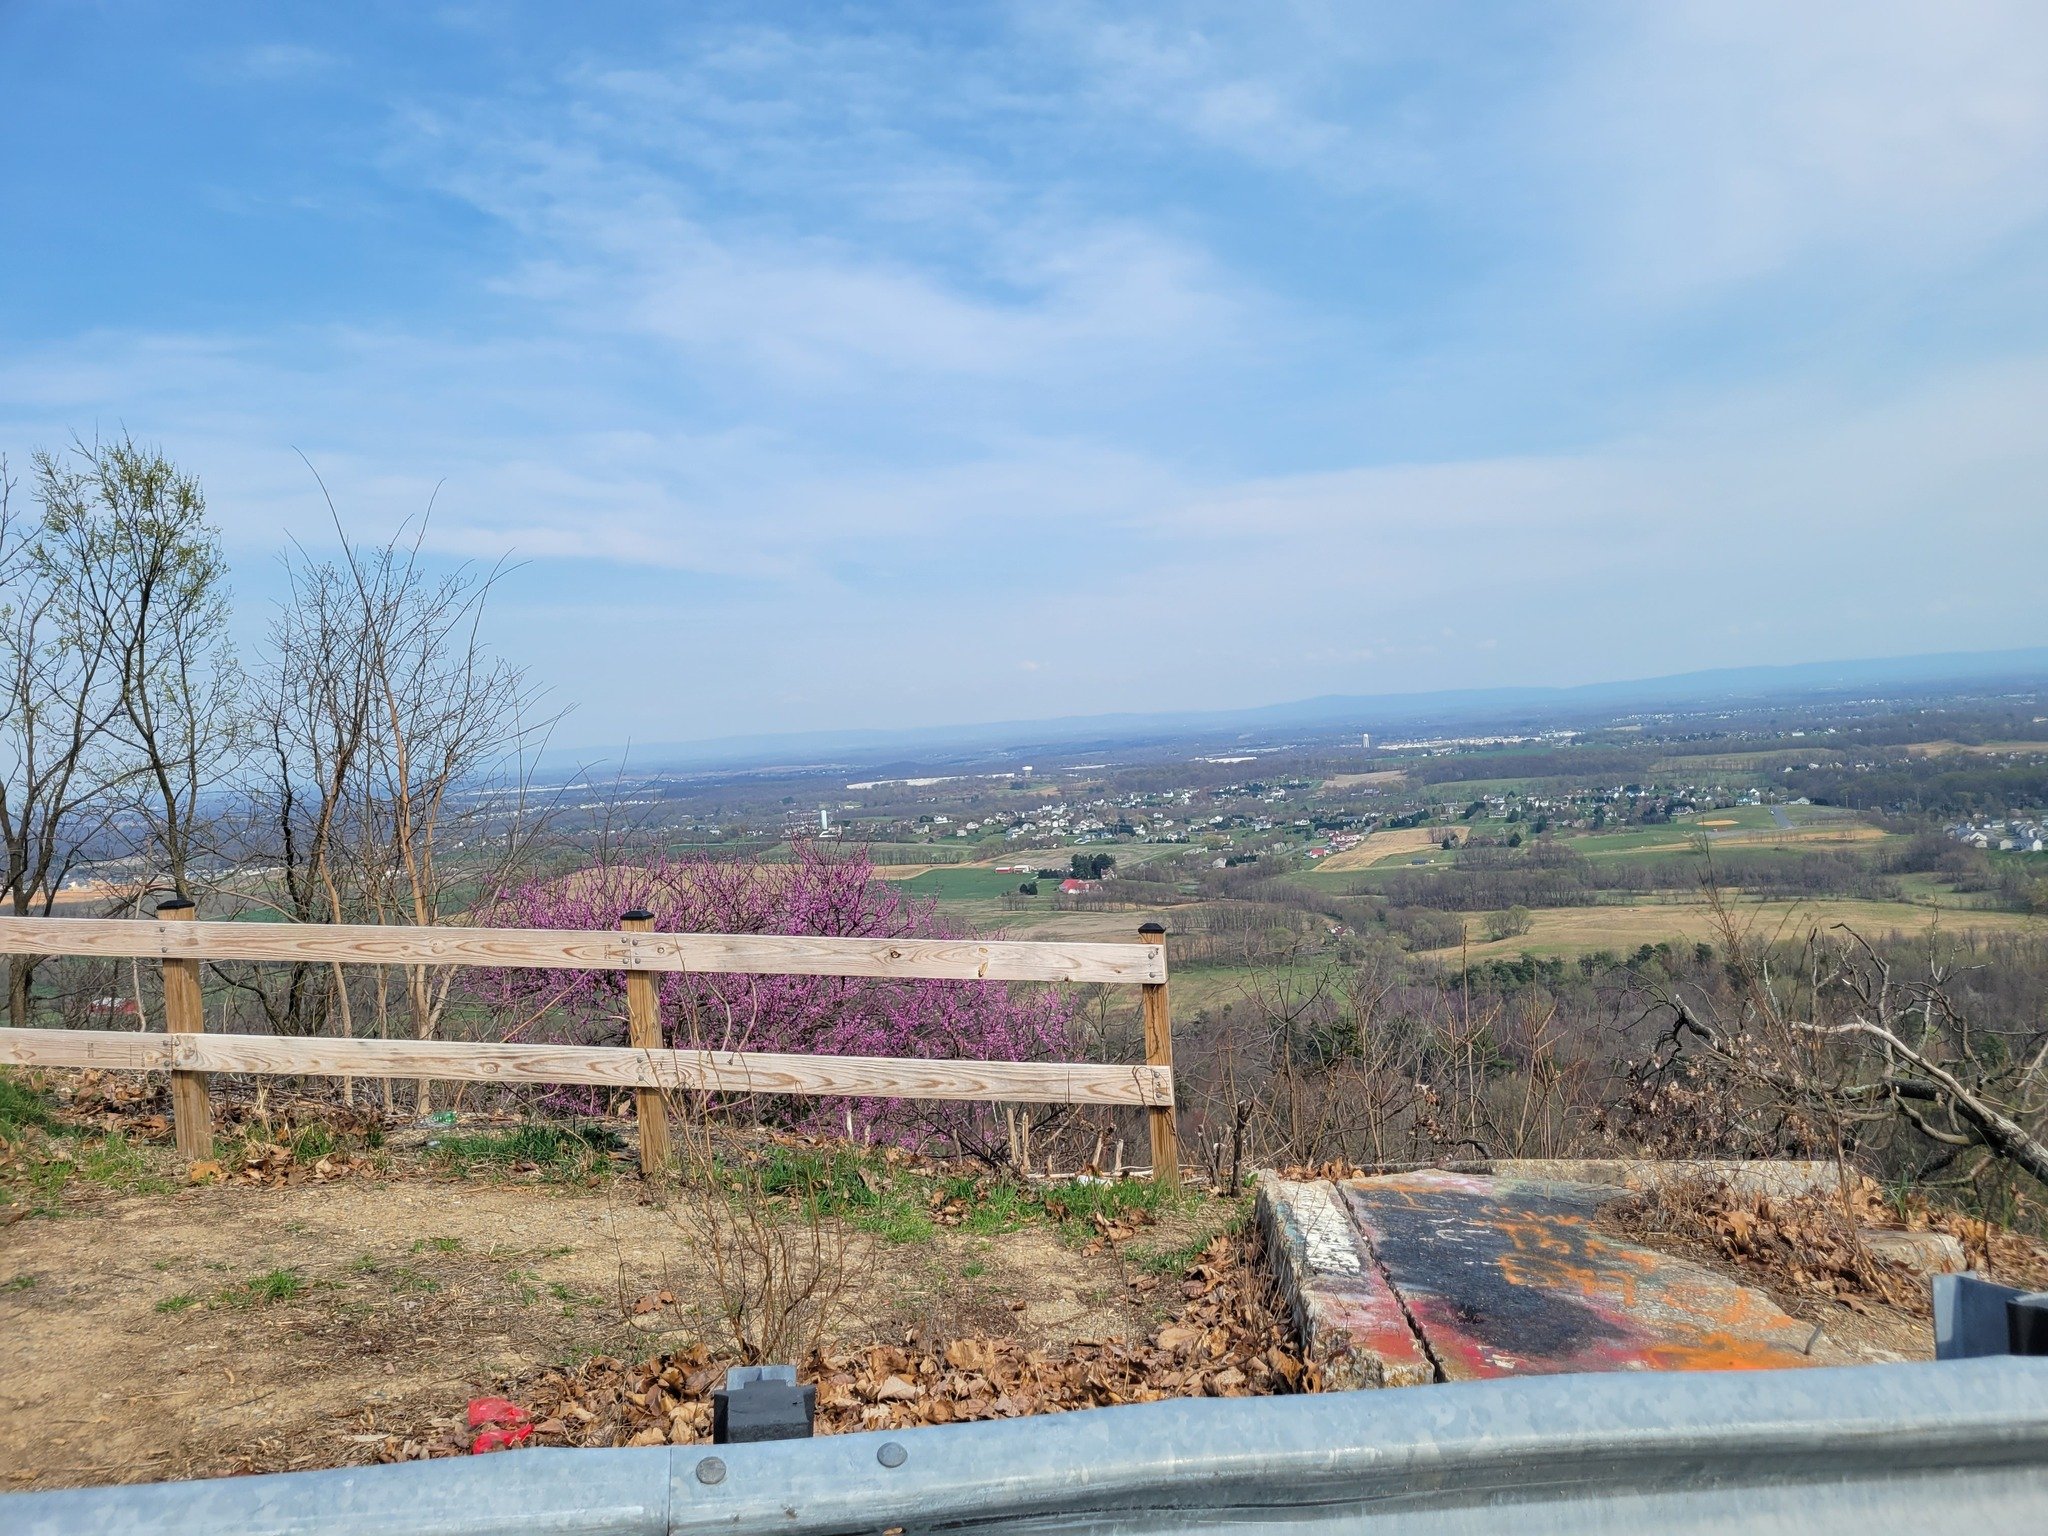 You never know where a country roads ride may take you. This is passengers view of the overlook from Parks Gap off of Dry Run Road in Berkeley County. 
Plan your next country road adventure in Berkeley County WV. 

#countryroads #springtime #visitmar